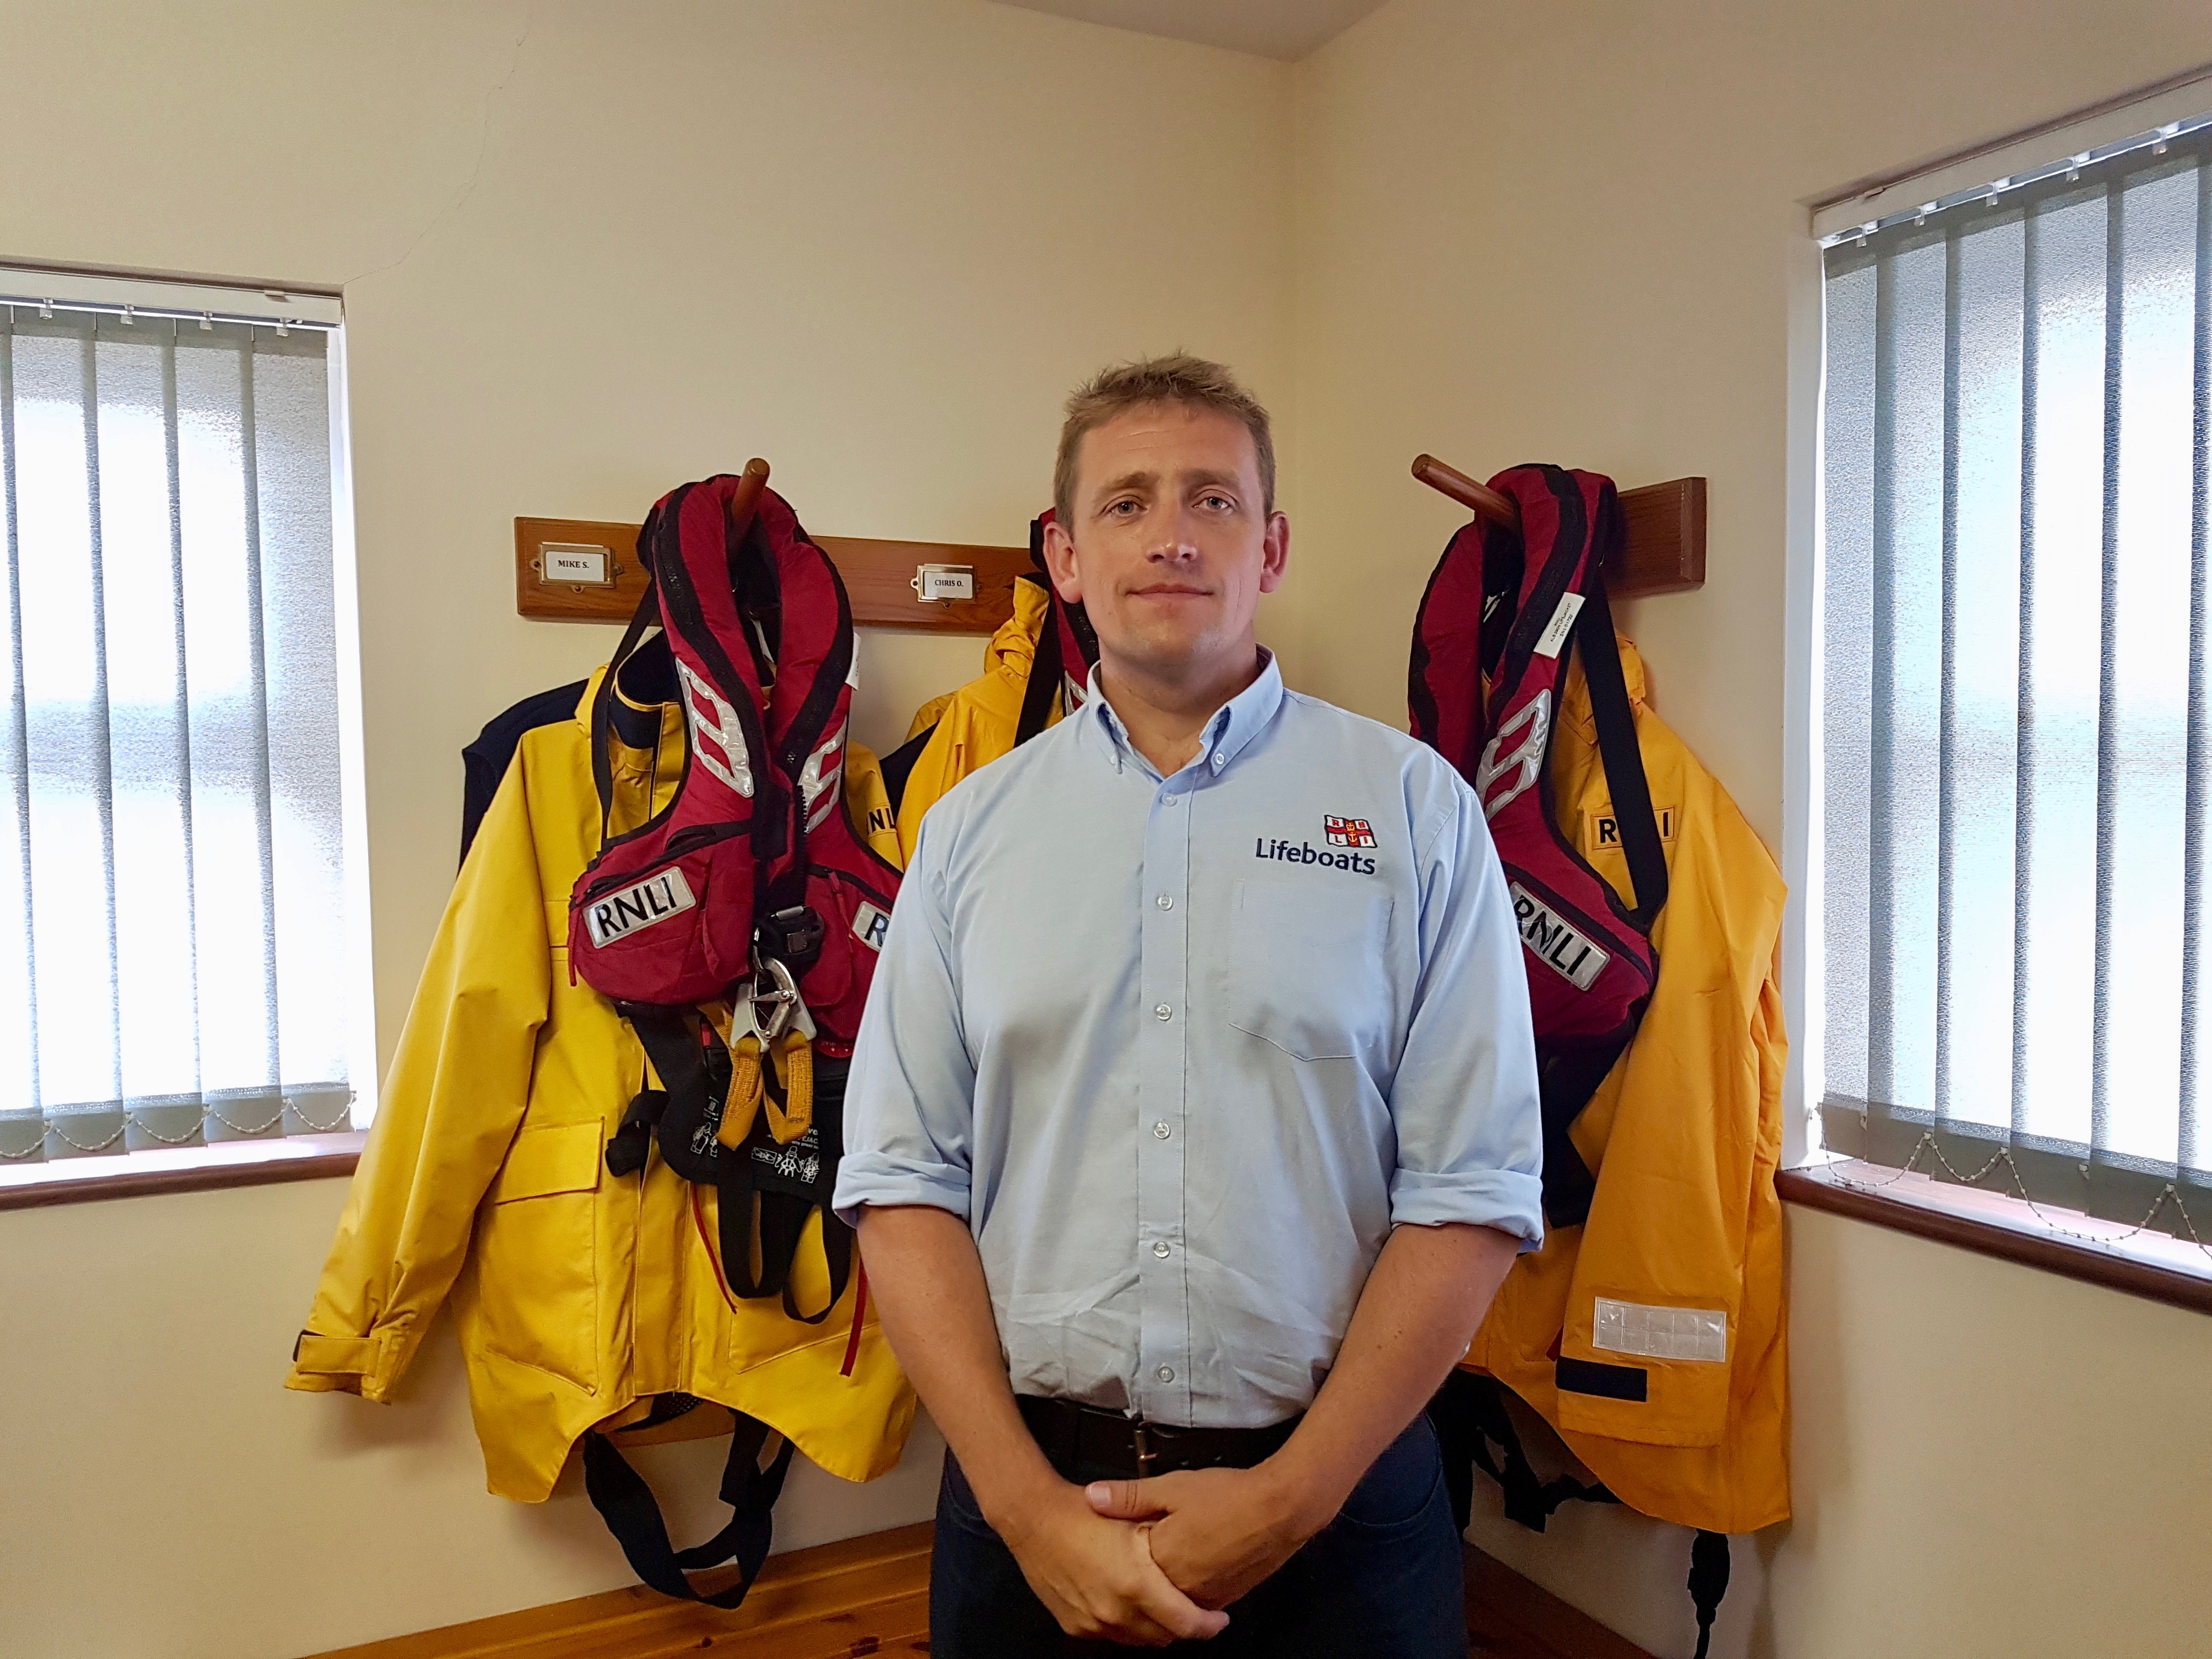 Will Stephens RNLI Head of Lifesaving Delivery